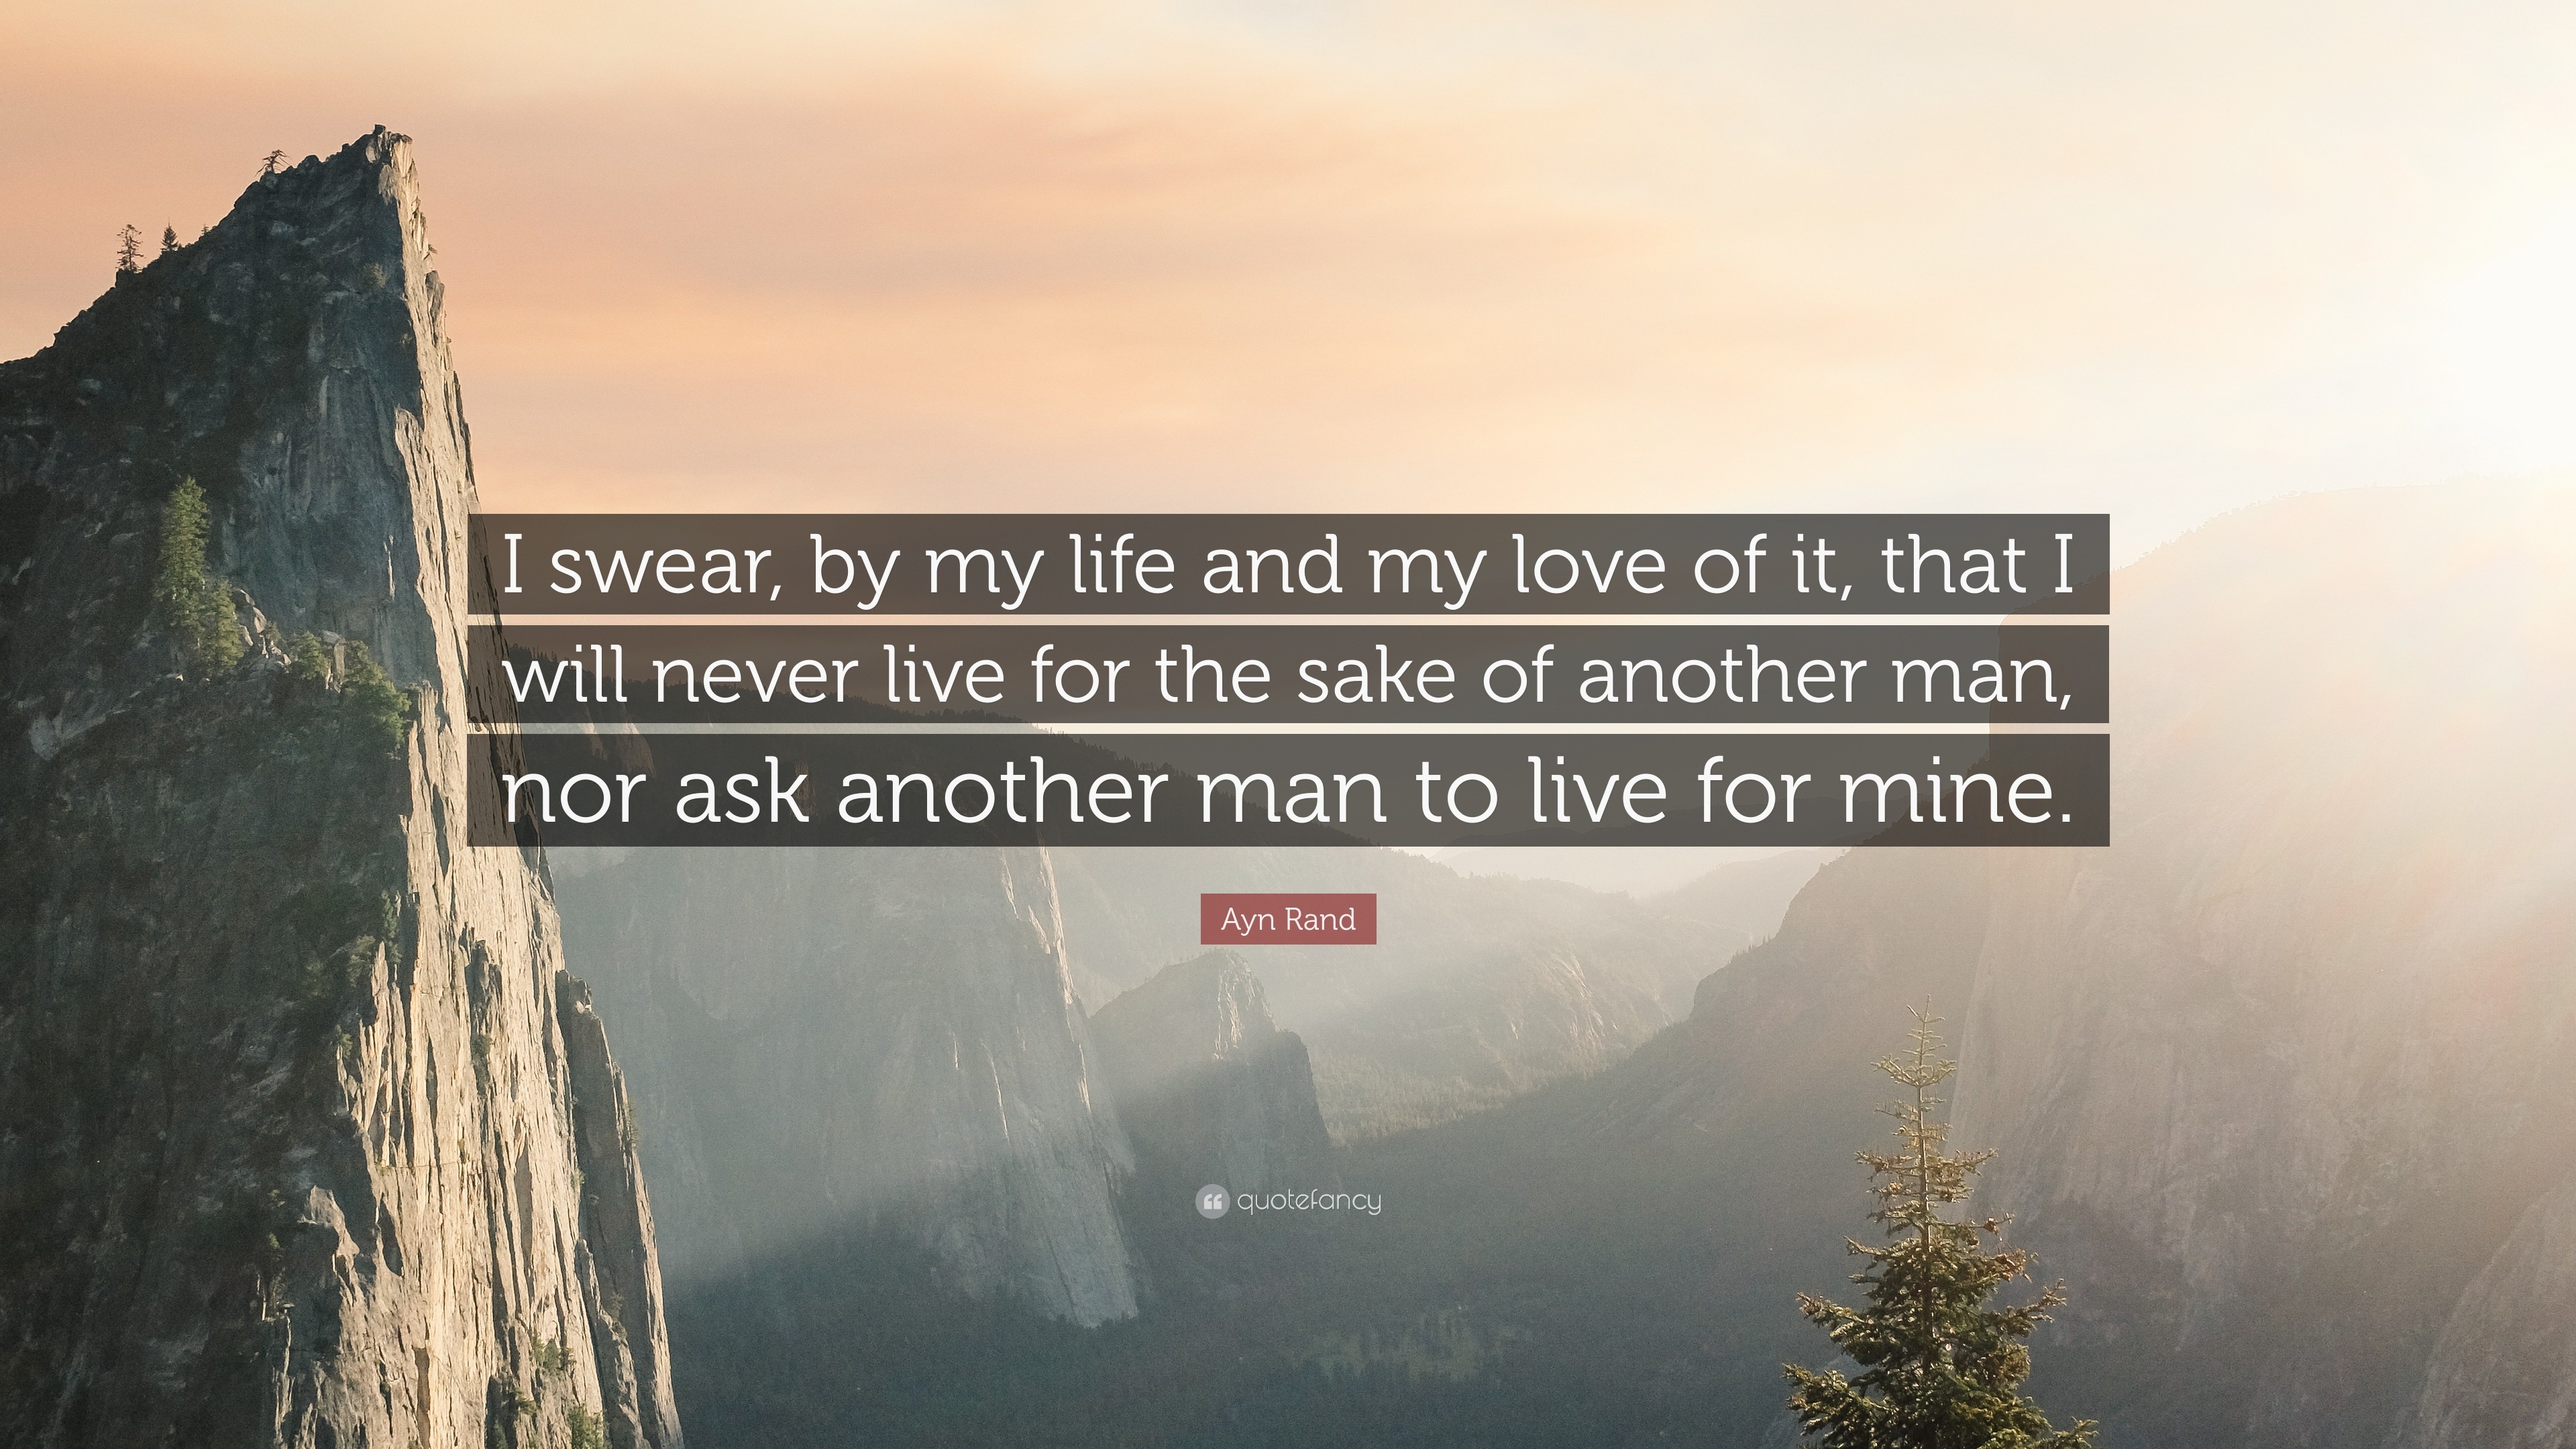 Ayn Rand Quote “I swear by my life and my love of it